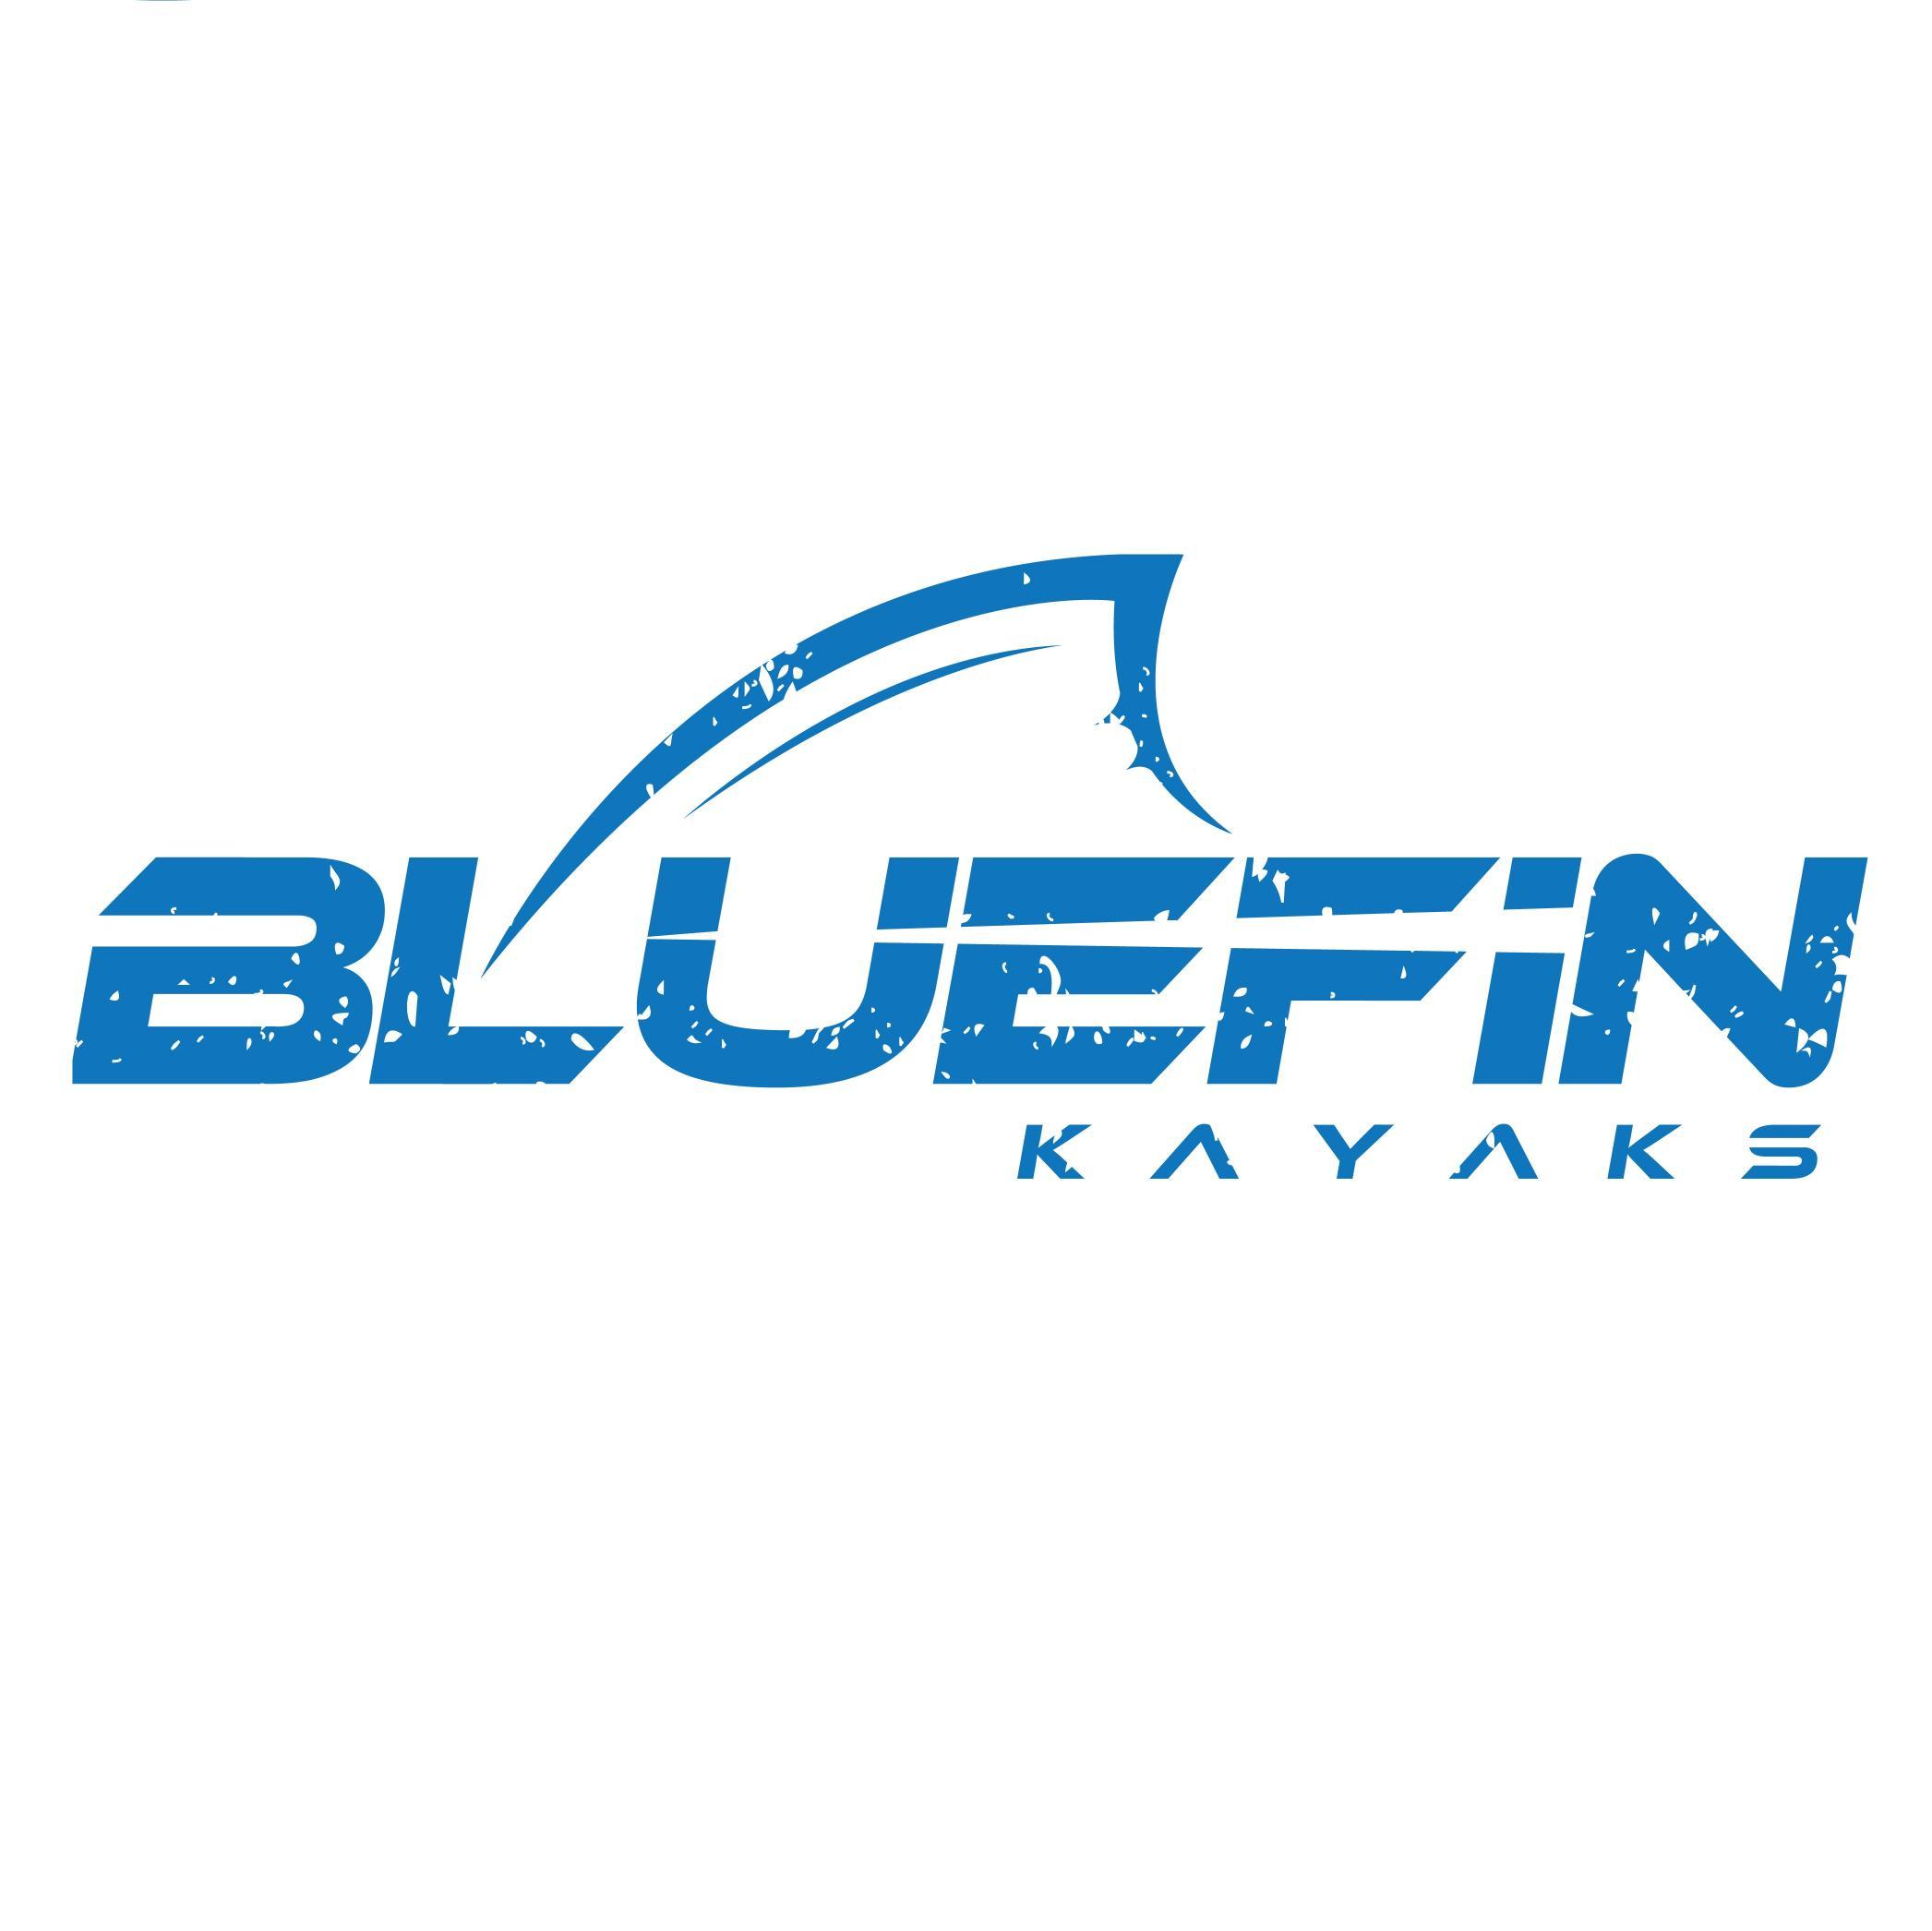 On-line retailer of sit on top kayaks, fishing kayaks, tandem kayaks and paddle boards (SUP). Please do not hesitate to contact us. UK based company.